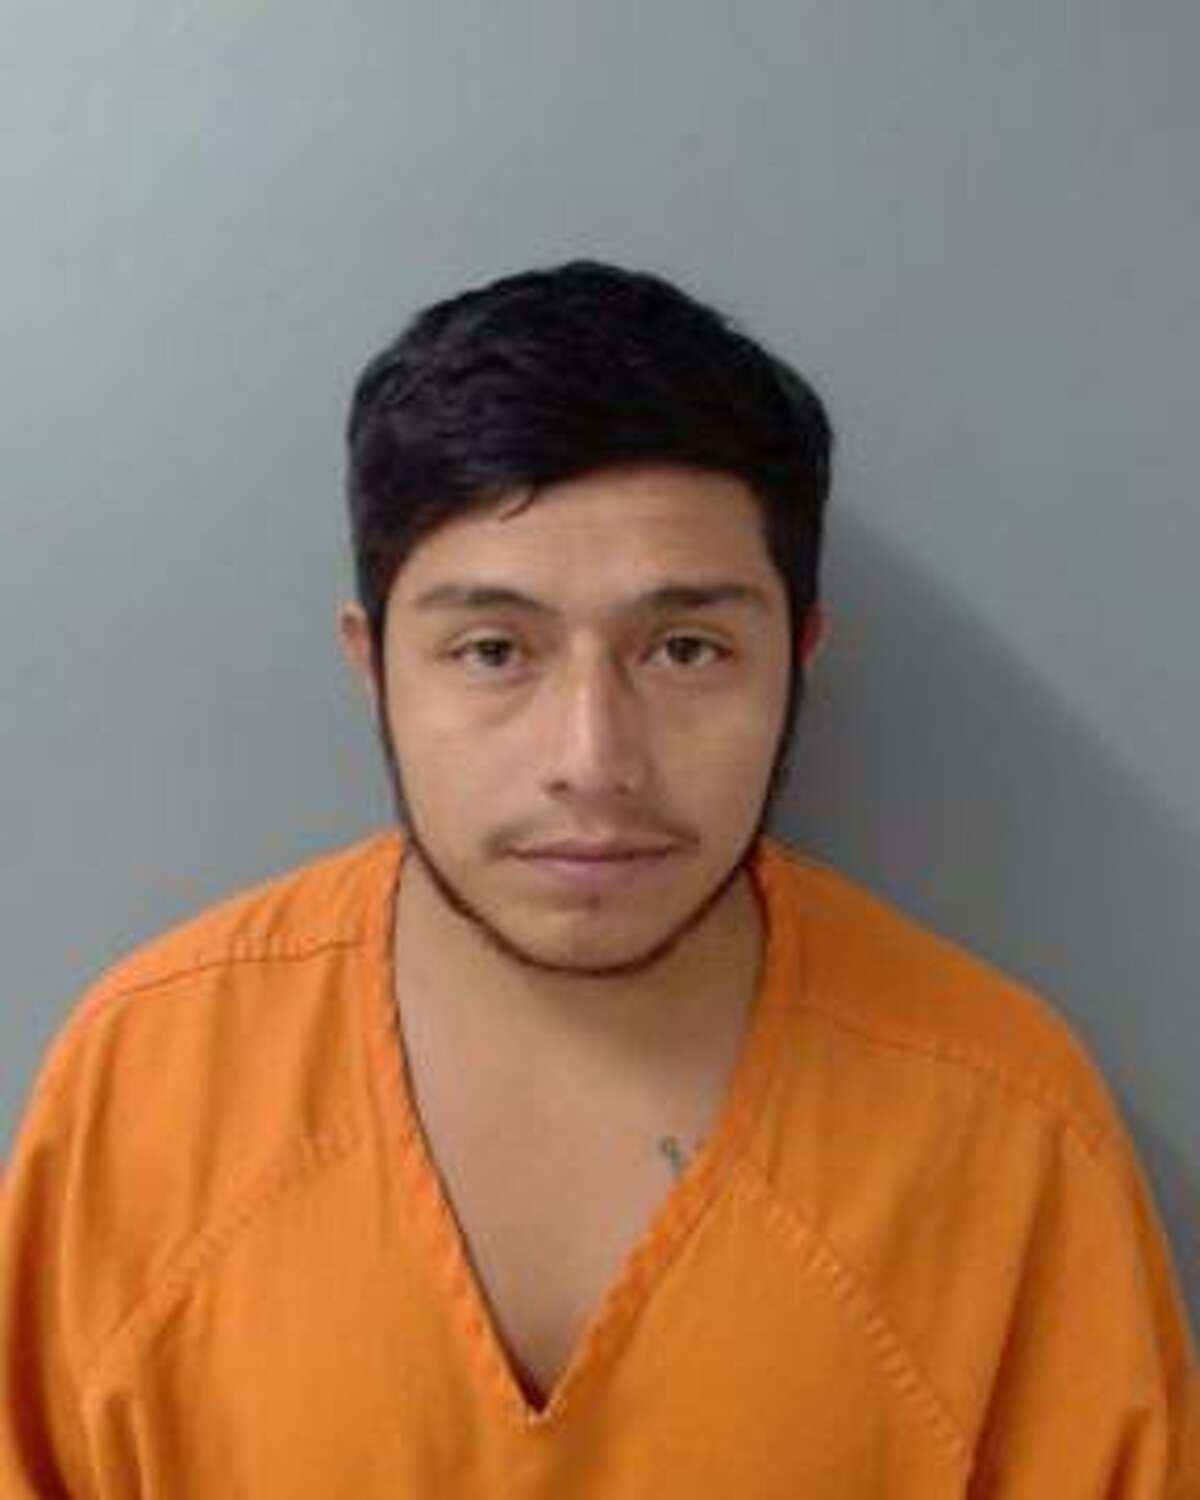 Laredo Cbp Officers Arrest Man Wanted For Sexual Offense 5623